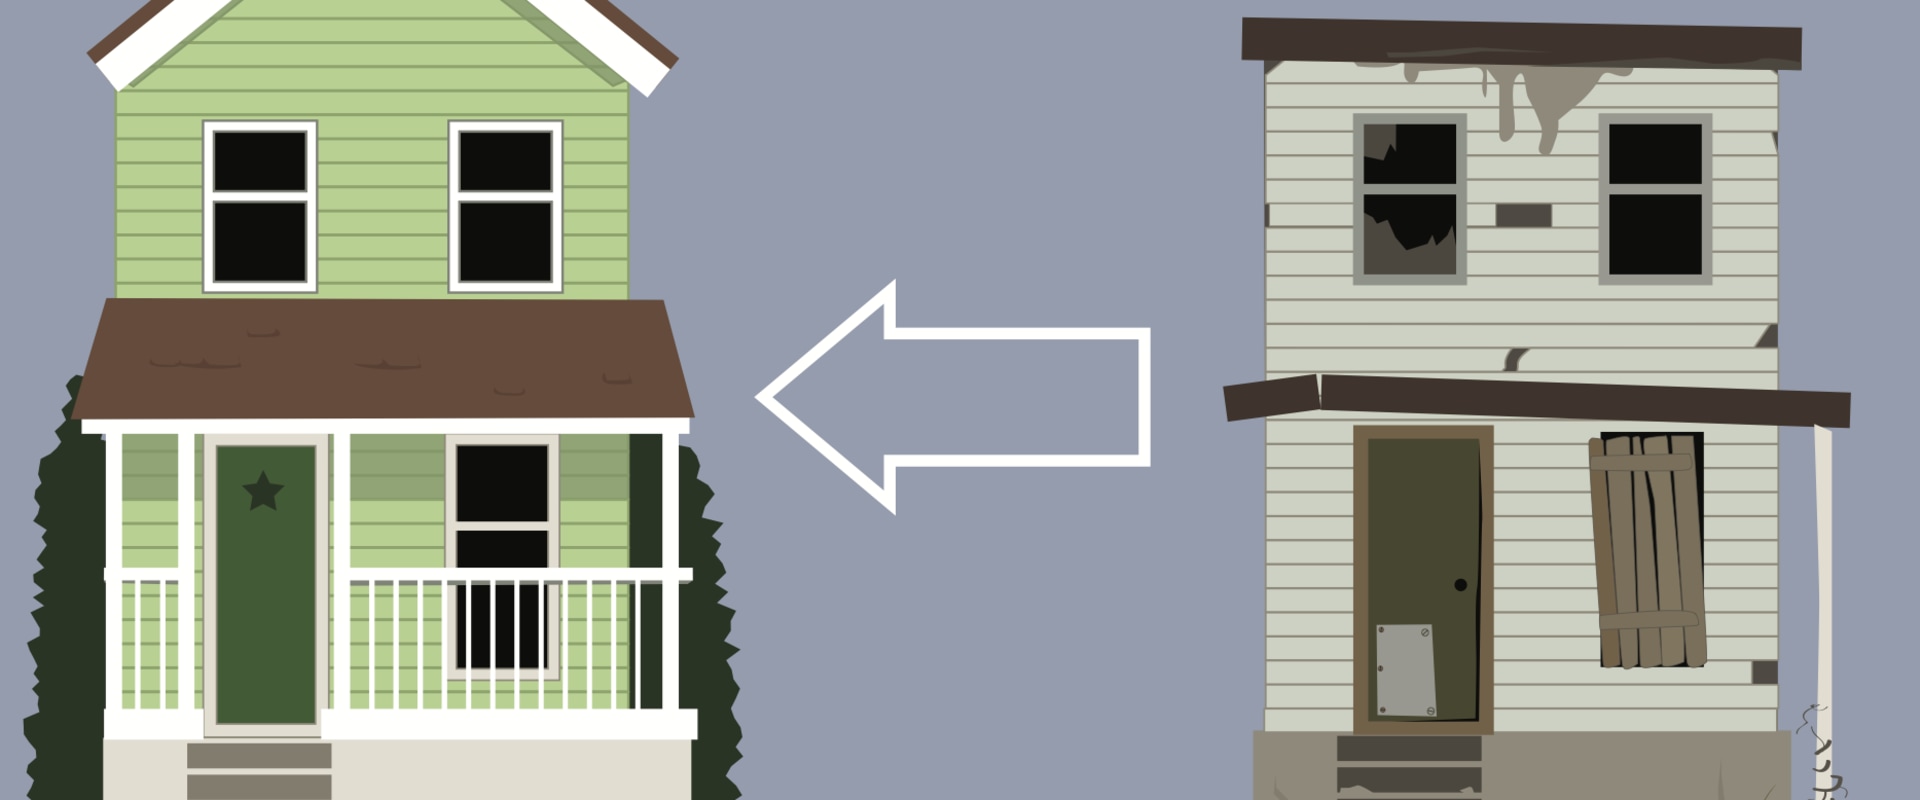 Is flipping a house considered earned income?